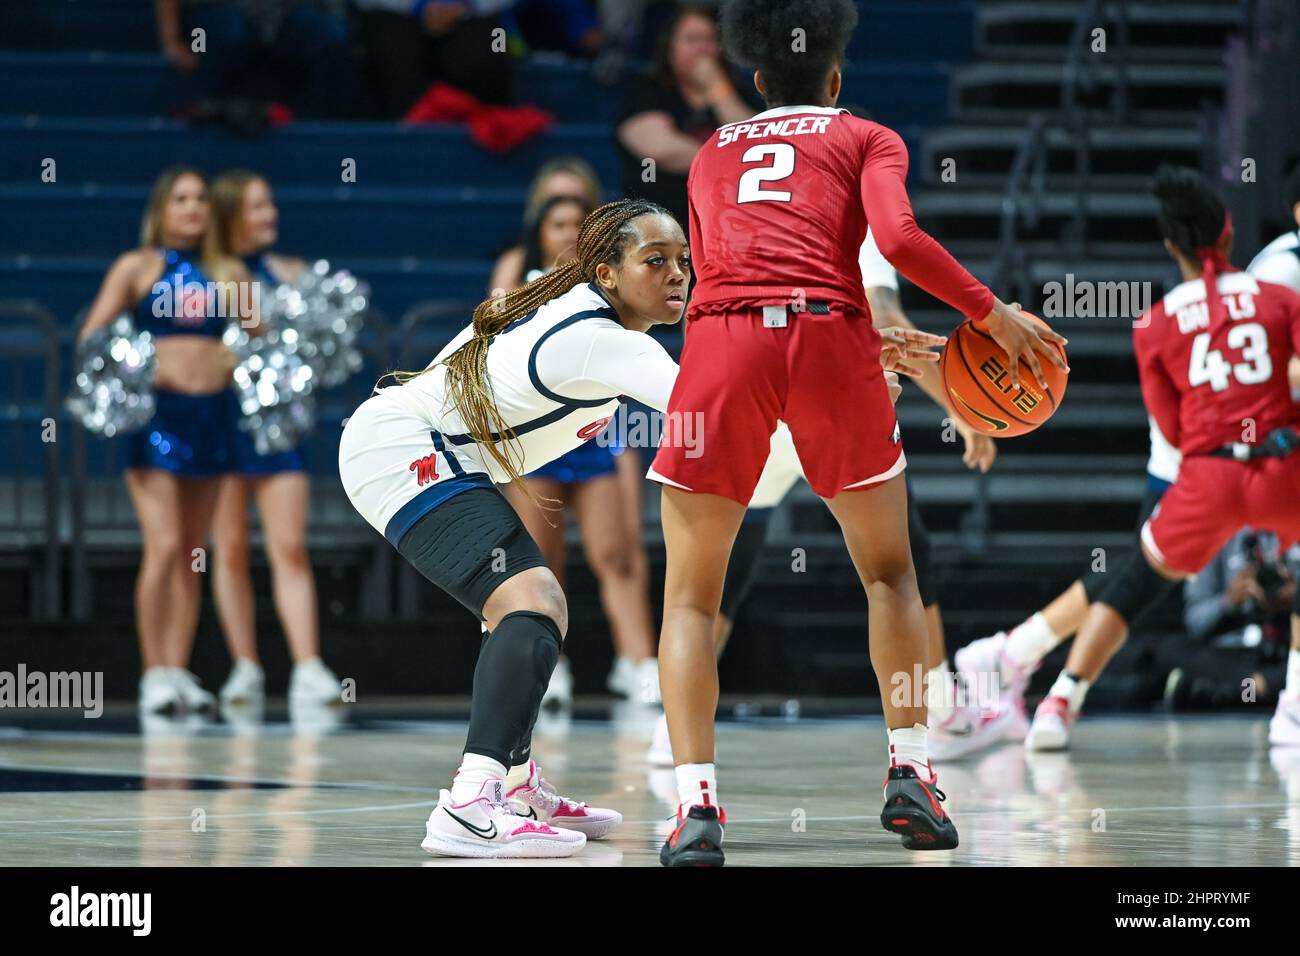 Oxford, MS, USA. 22nd Feb, 2022. Ole' Miss guard Mimi Reid (2) on the defensive against Arkansas guard Samara Spencer (2) during the college basketball game between the Arkansas Razorbacks and the Ole' Miss Rebels on February 22, 2022 at the SJB Pavilion in Oxford, MS. (Photo by: Kevin Langley/CSM). Credit: csm/Alamy Live News Stock Photo